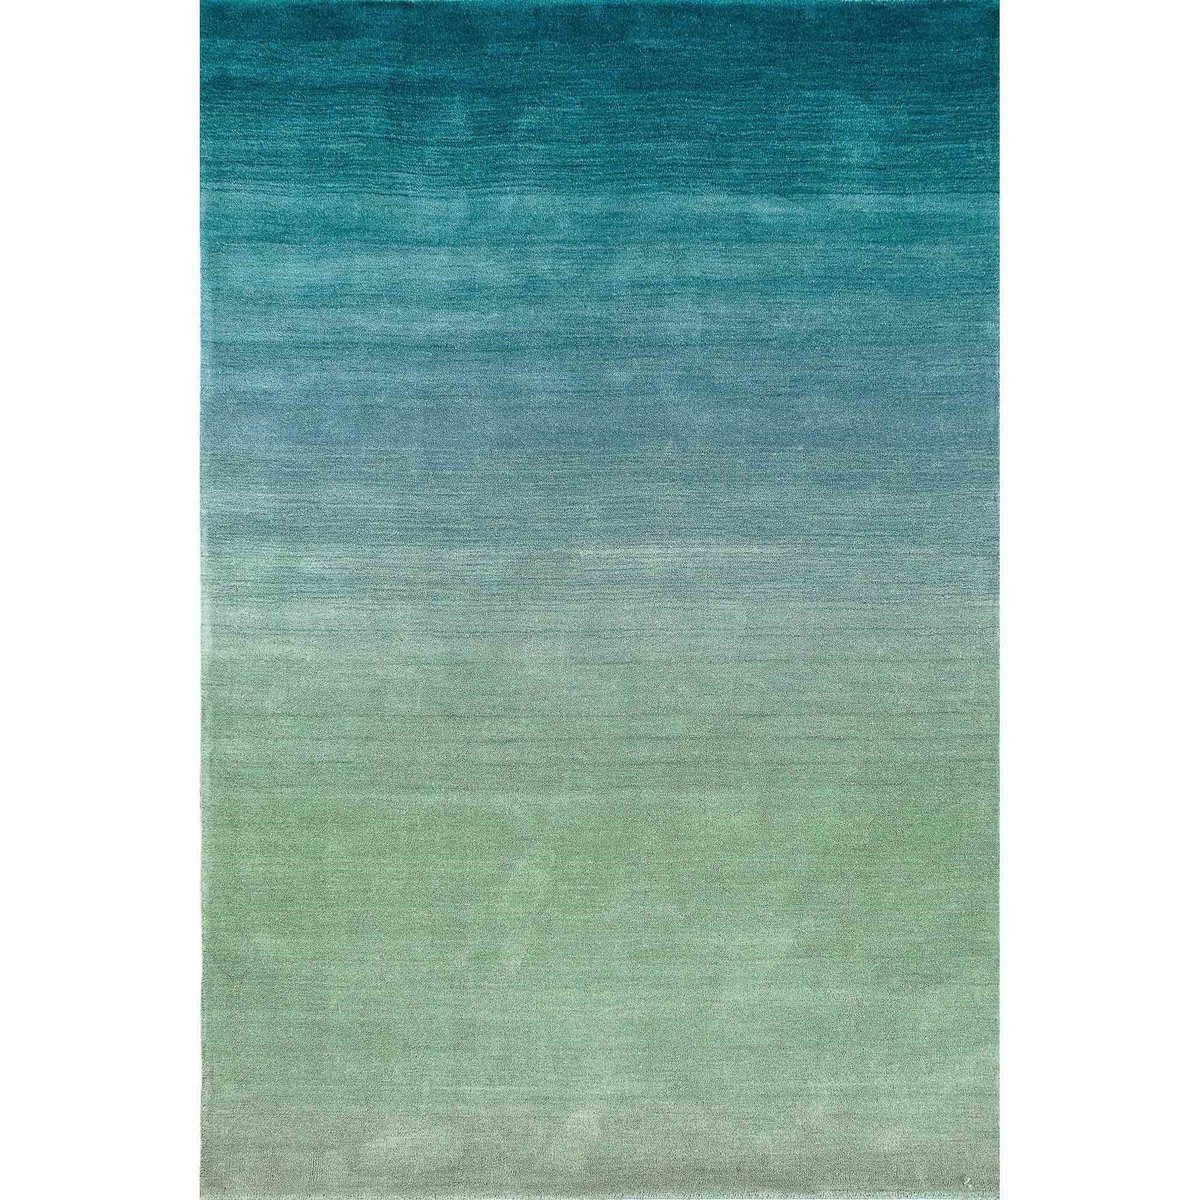 Liora Manne Arca Ombre Rugs Direct, Blue Ombre Area Rugs